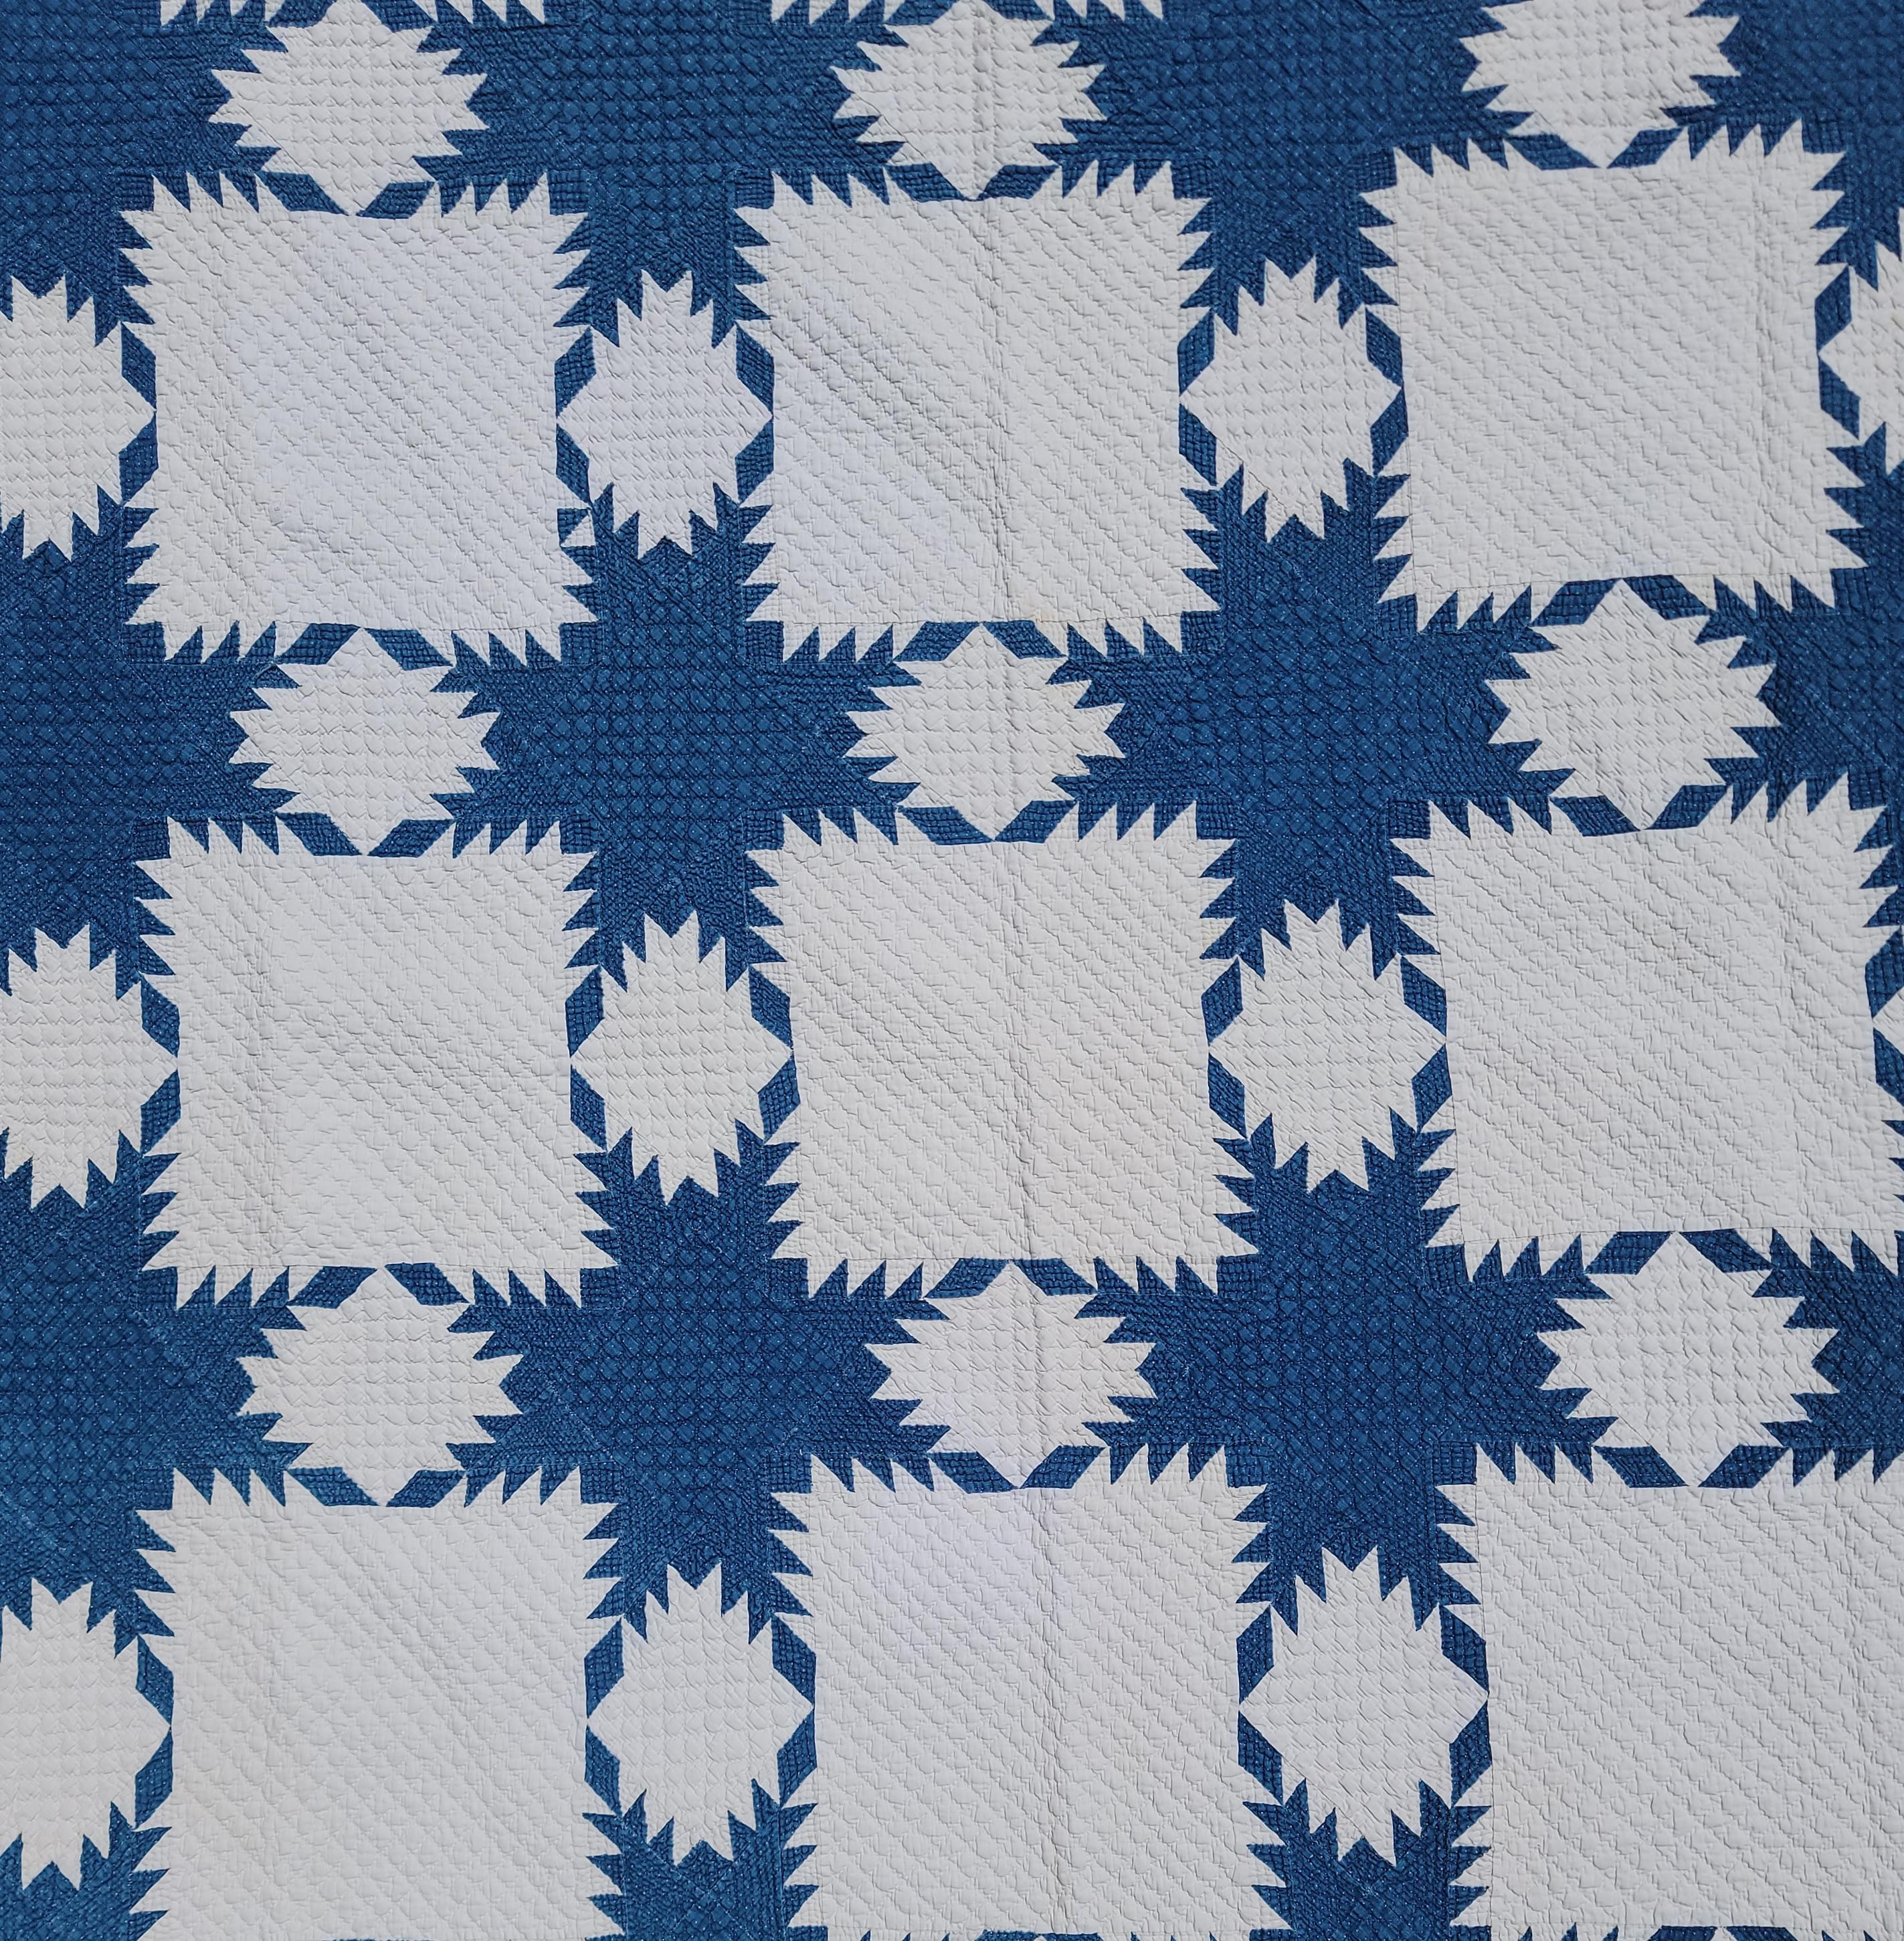 Folk Art 19th Century Blue and White Feathered Star Quilt